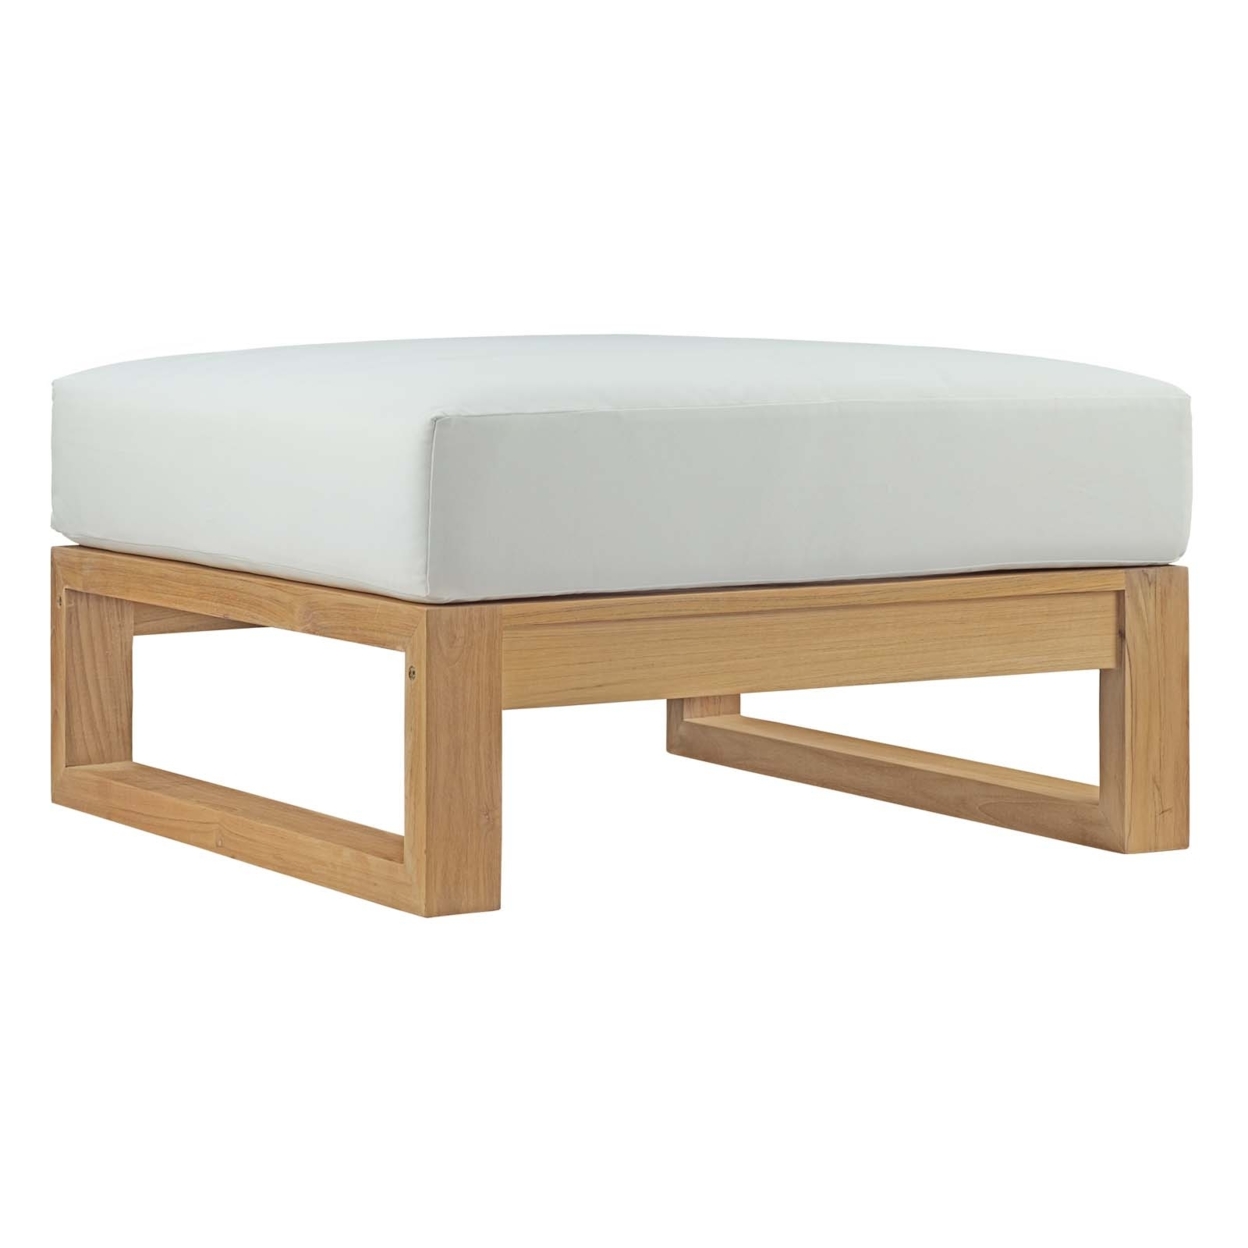 Modway Upland Outdoor Patio Teak Ottoman in Natural White - image 1 of 4